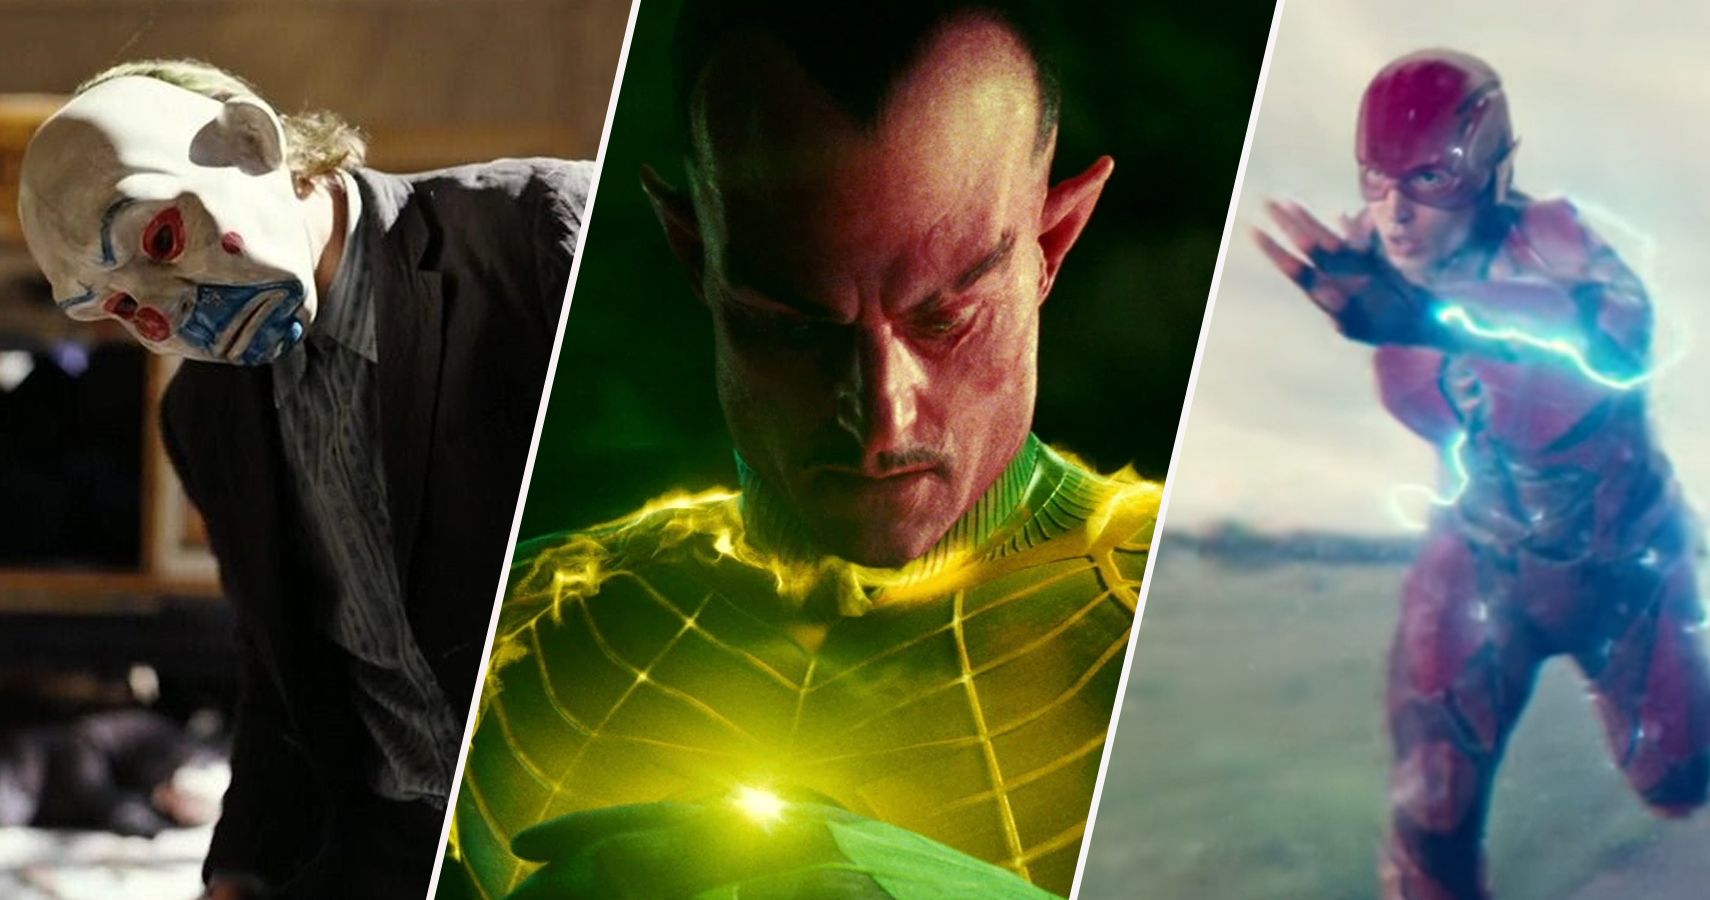 The Flash: 22 Easter eggs and cameos you might have missed in the DC movie